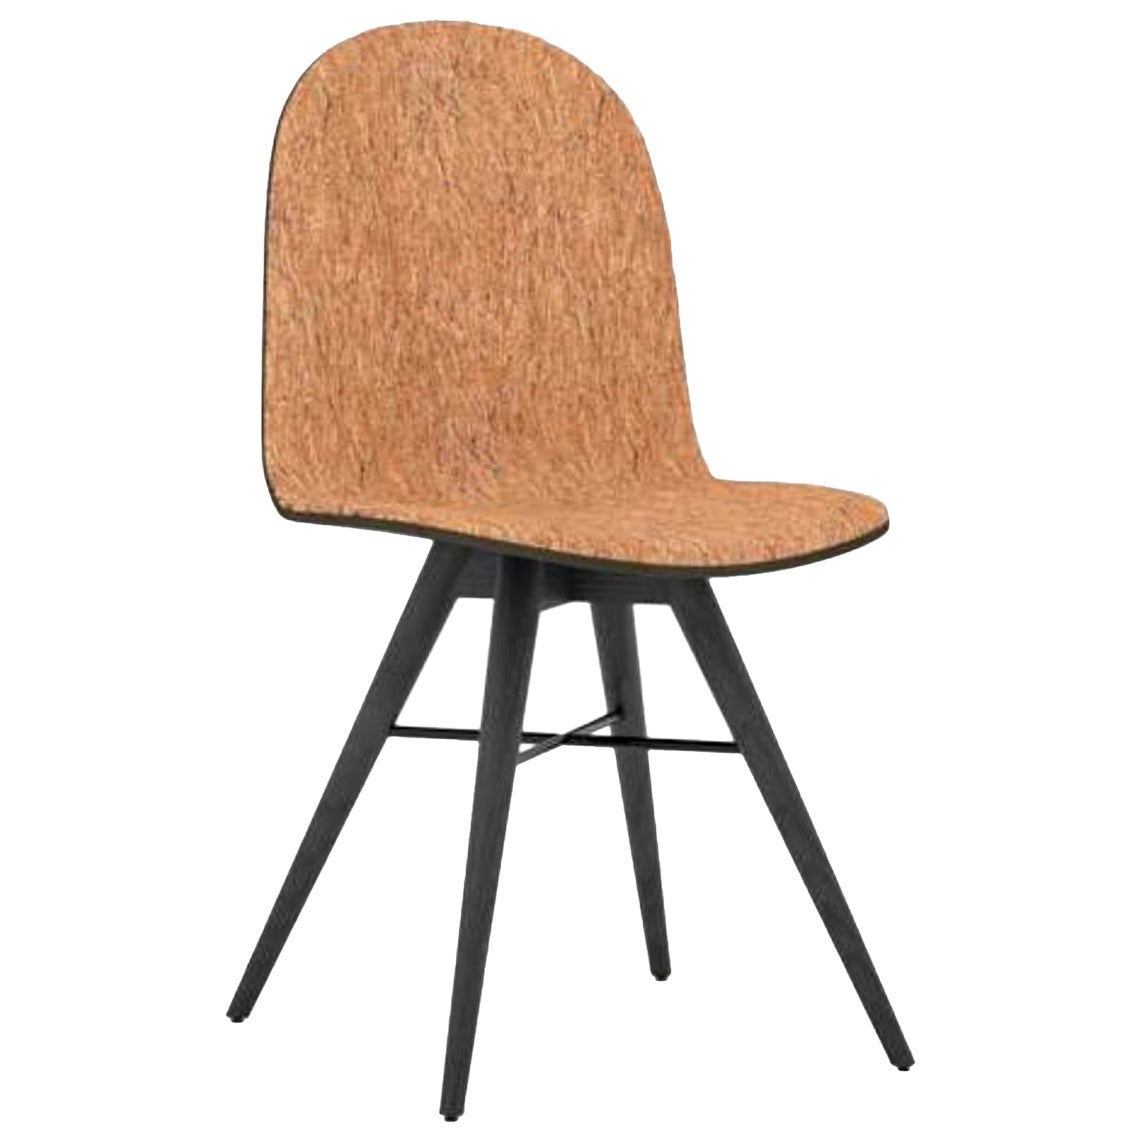 Black Painted Ash and Corkfabric Contemporary Chair by Alexandre Caldas For Sale